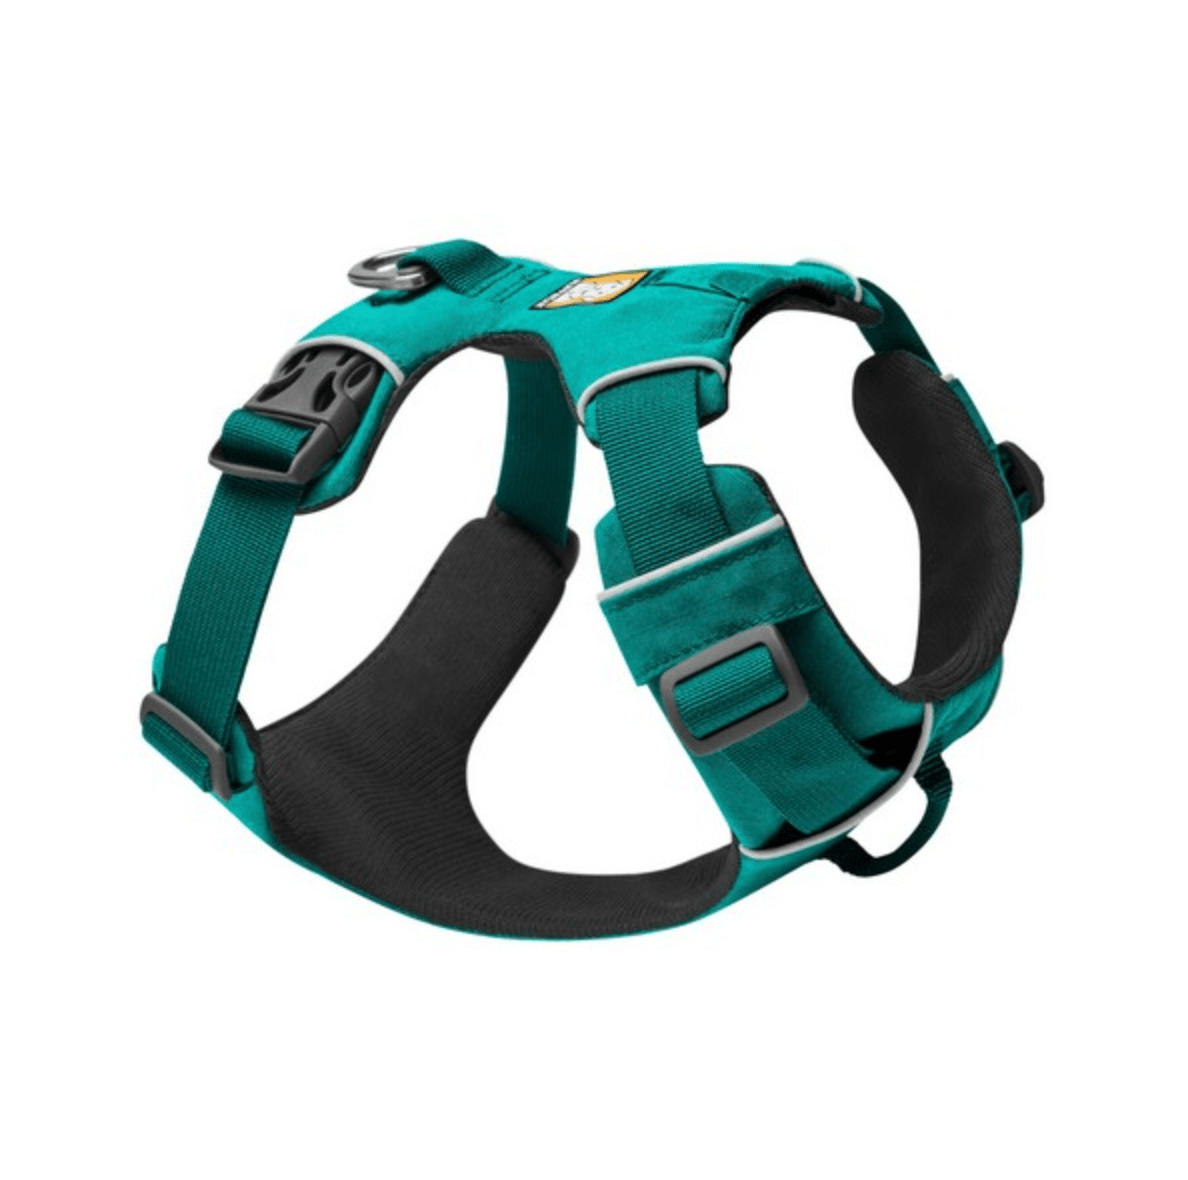 Ruffwear Front Range Dog Harness (Teal) - Pet's Play Toy Store